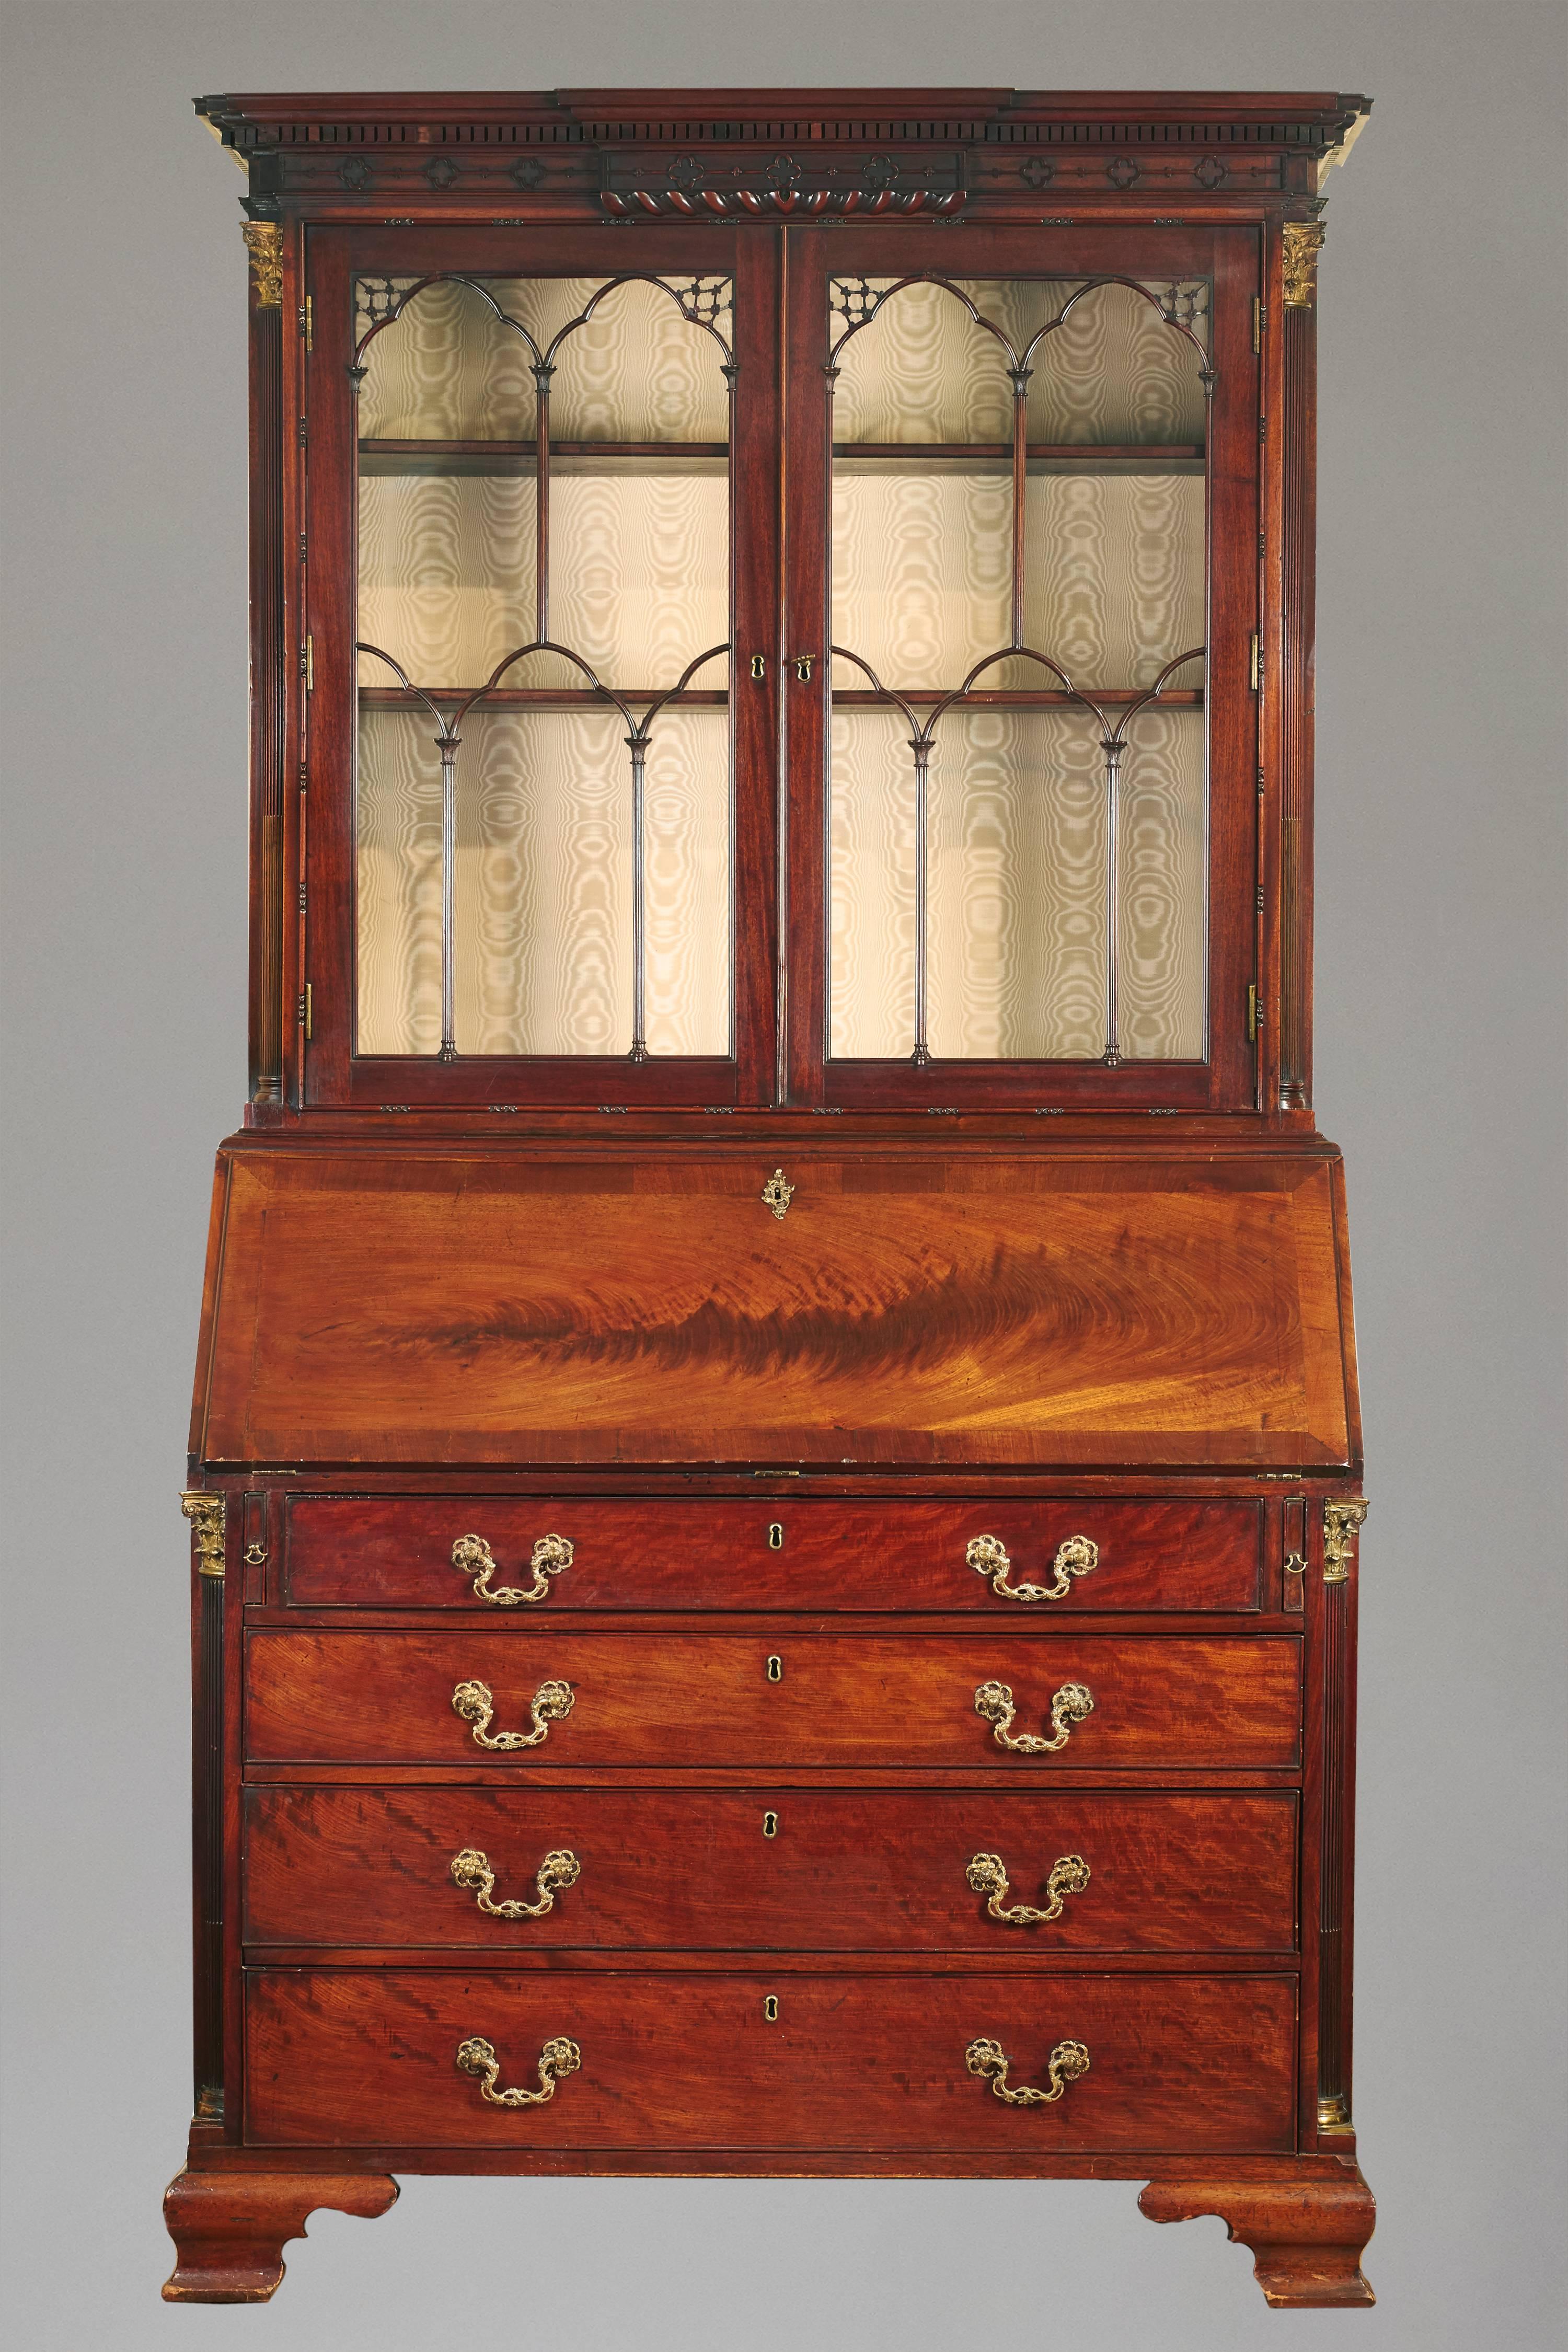 A fine quality George III period brass-mounted figured mahogany bureau bookcase, the elaborately carved pediment above two glazed doors flanked by stop fluted columns with brass capitals, the central fall front desk with a well-fitted interior,